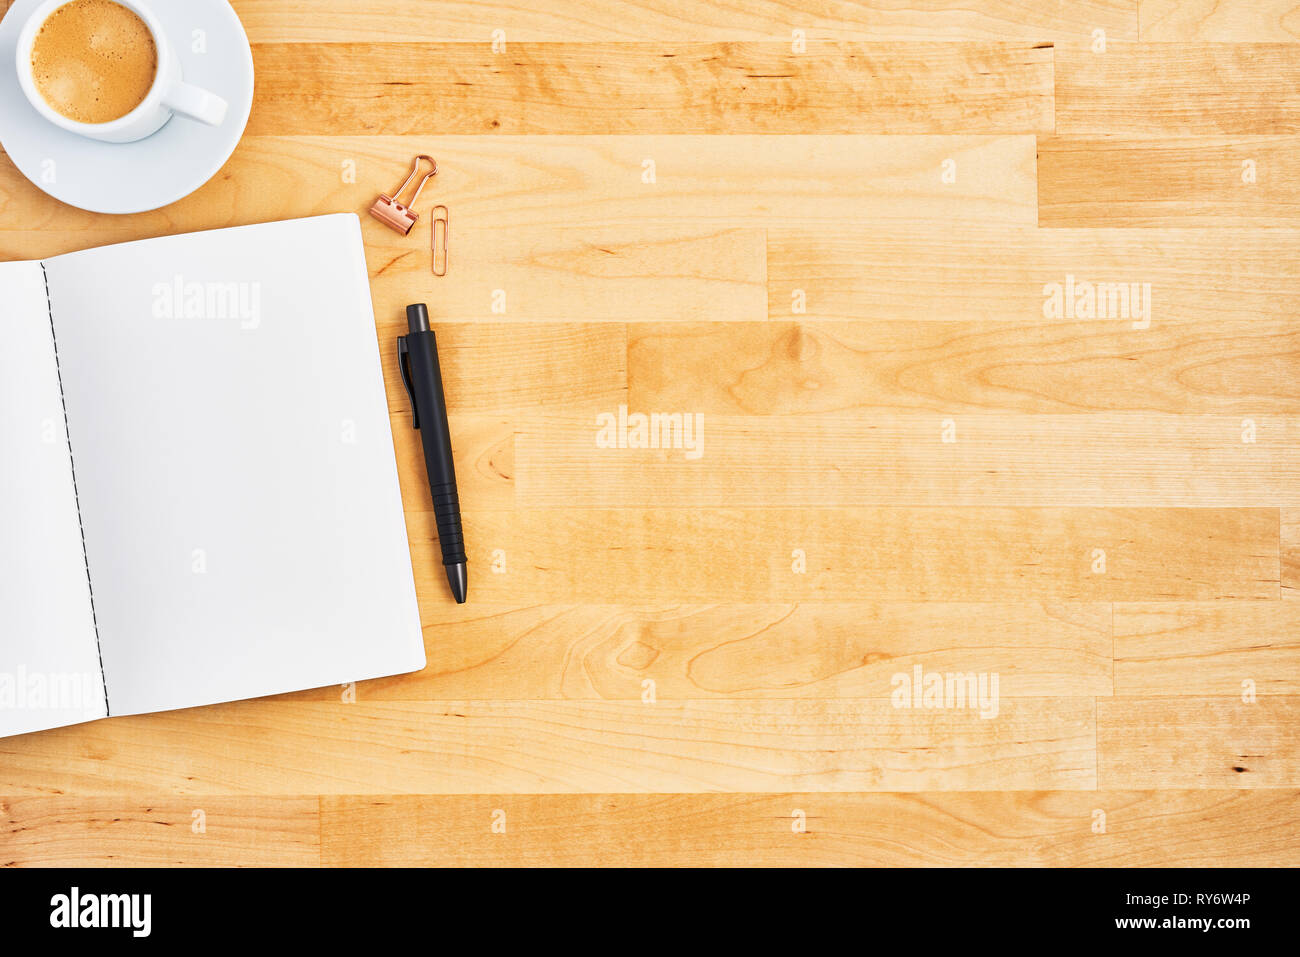 Wood office desk table with blank notebook, pen and cup of coffee or espresso. Top view. Copy space for text. Flat lay. Stock Photo